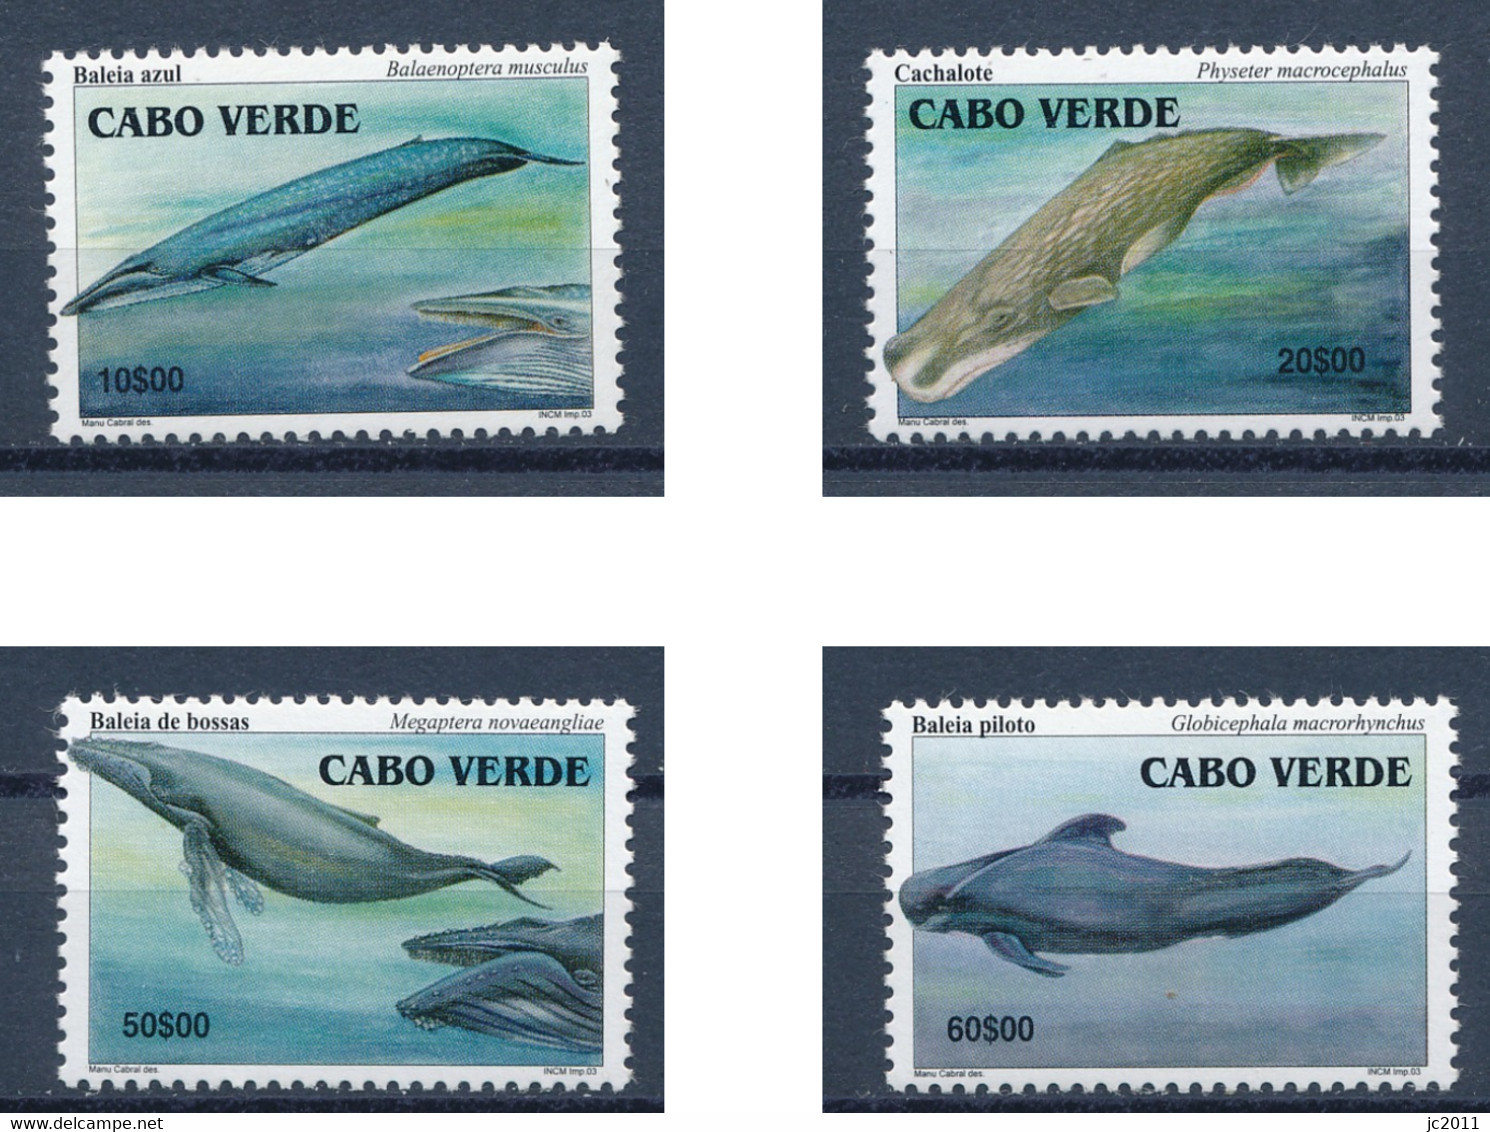 Cabo Verde - 2003 - Whales - MNH - Whales